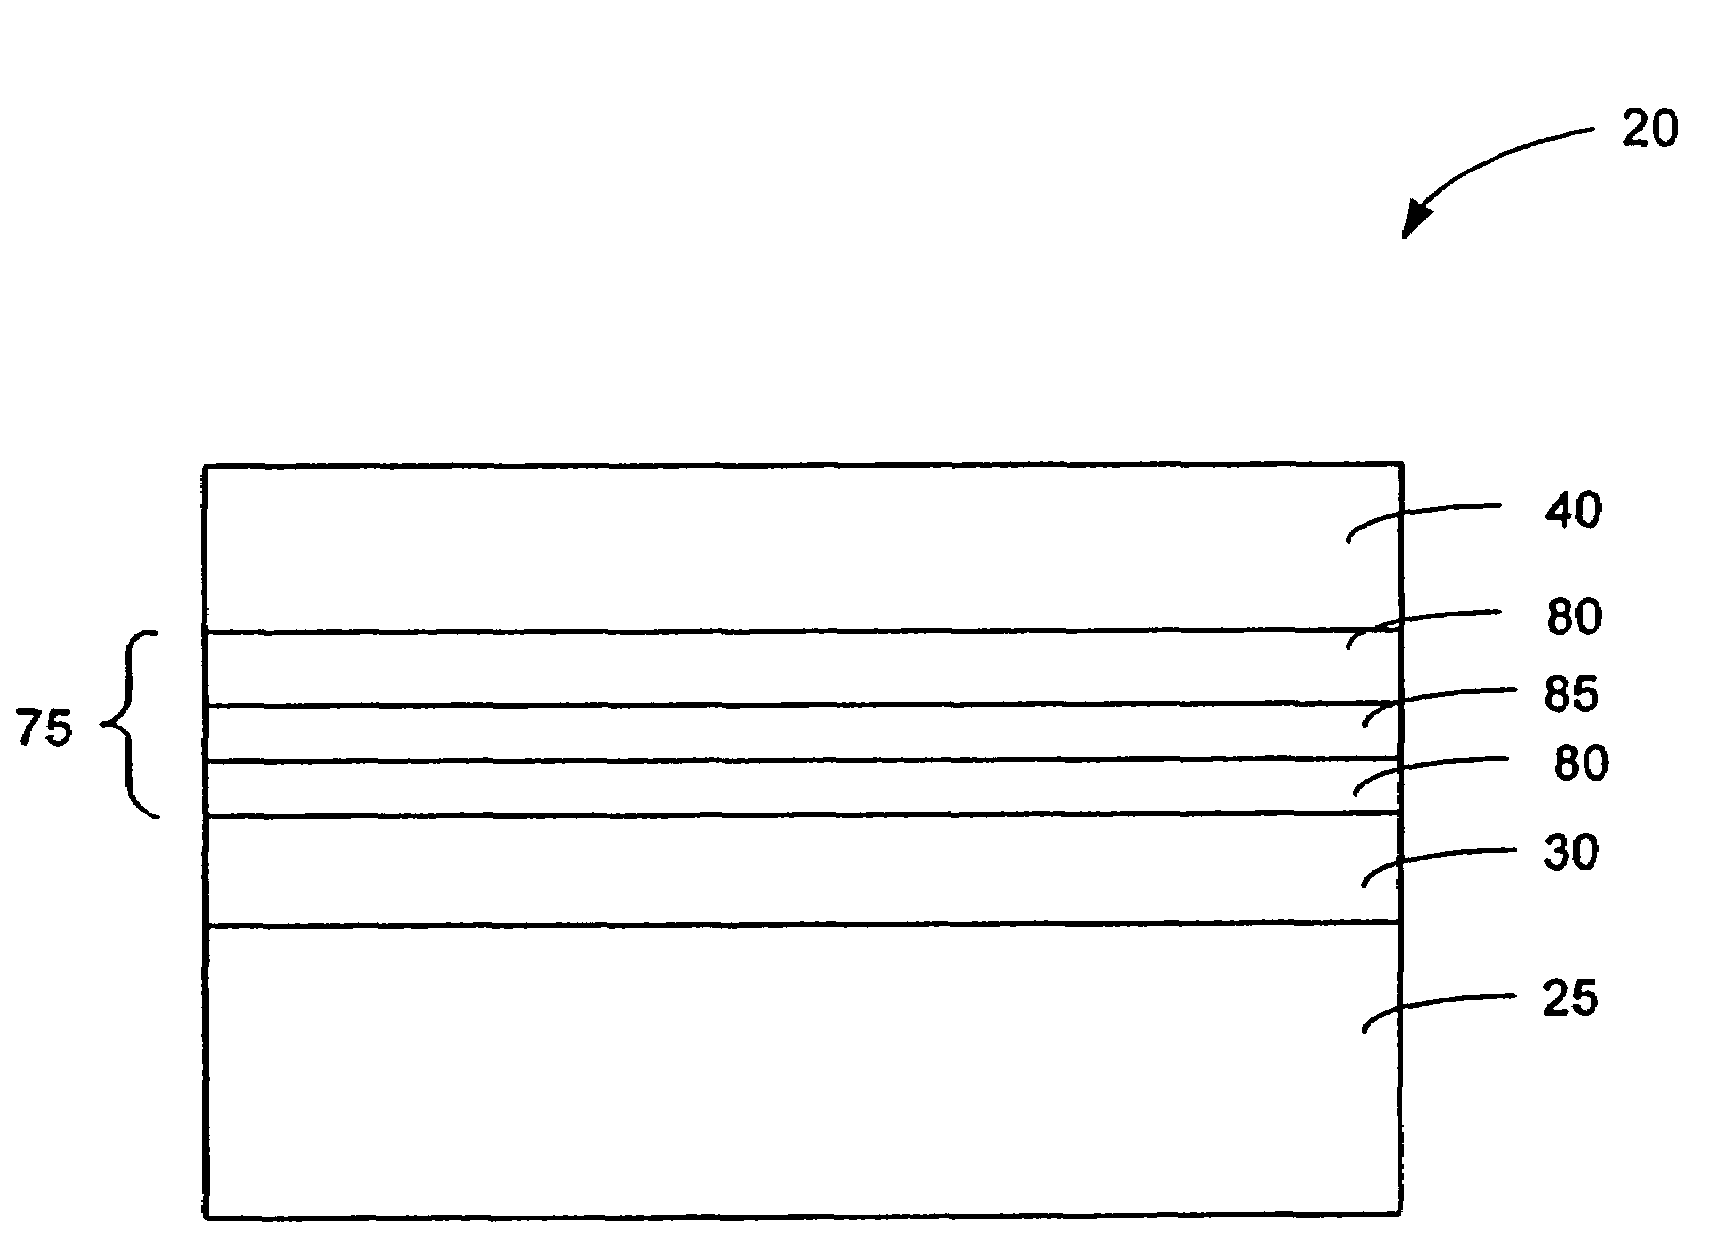 Shallow trench isolation using antireflection layer